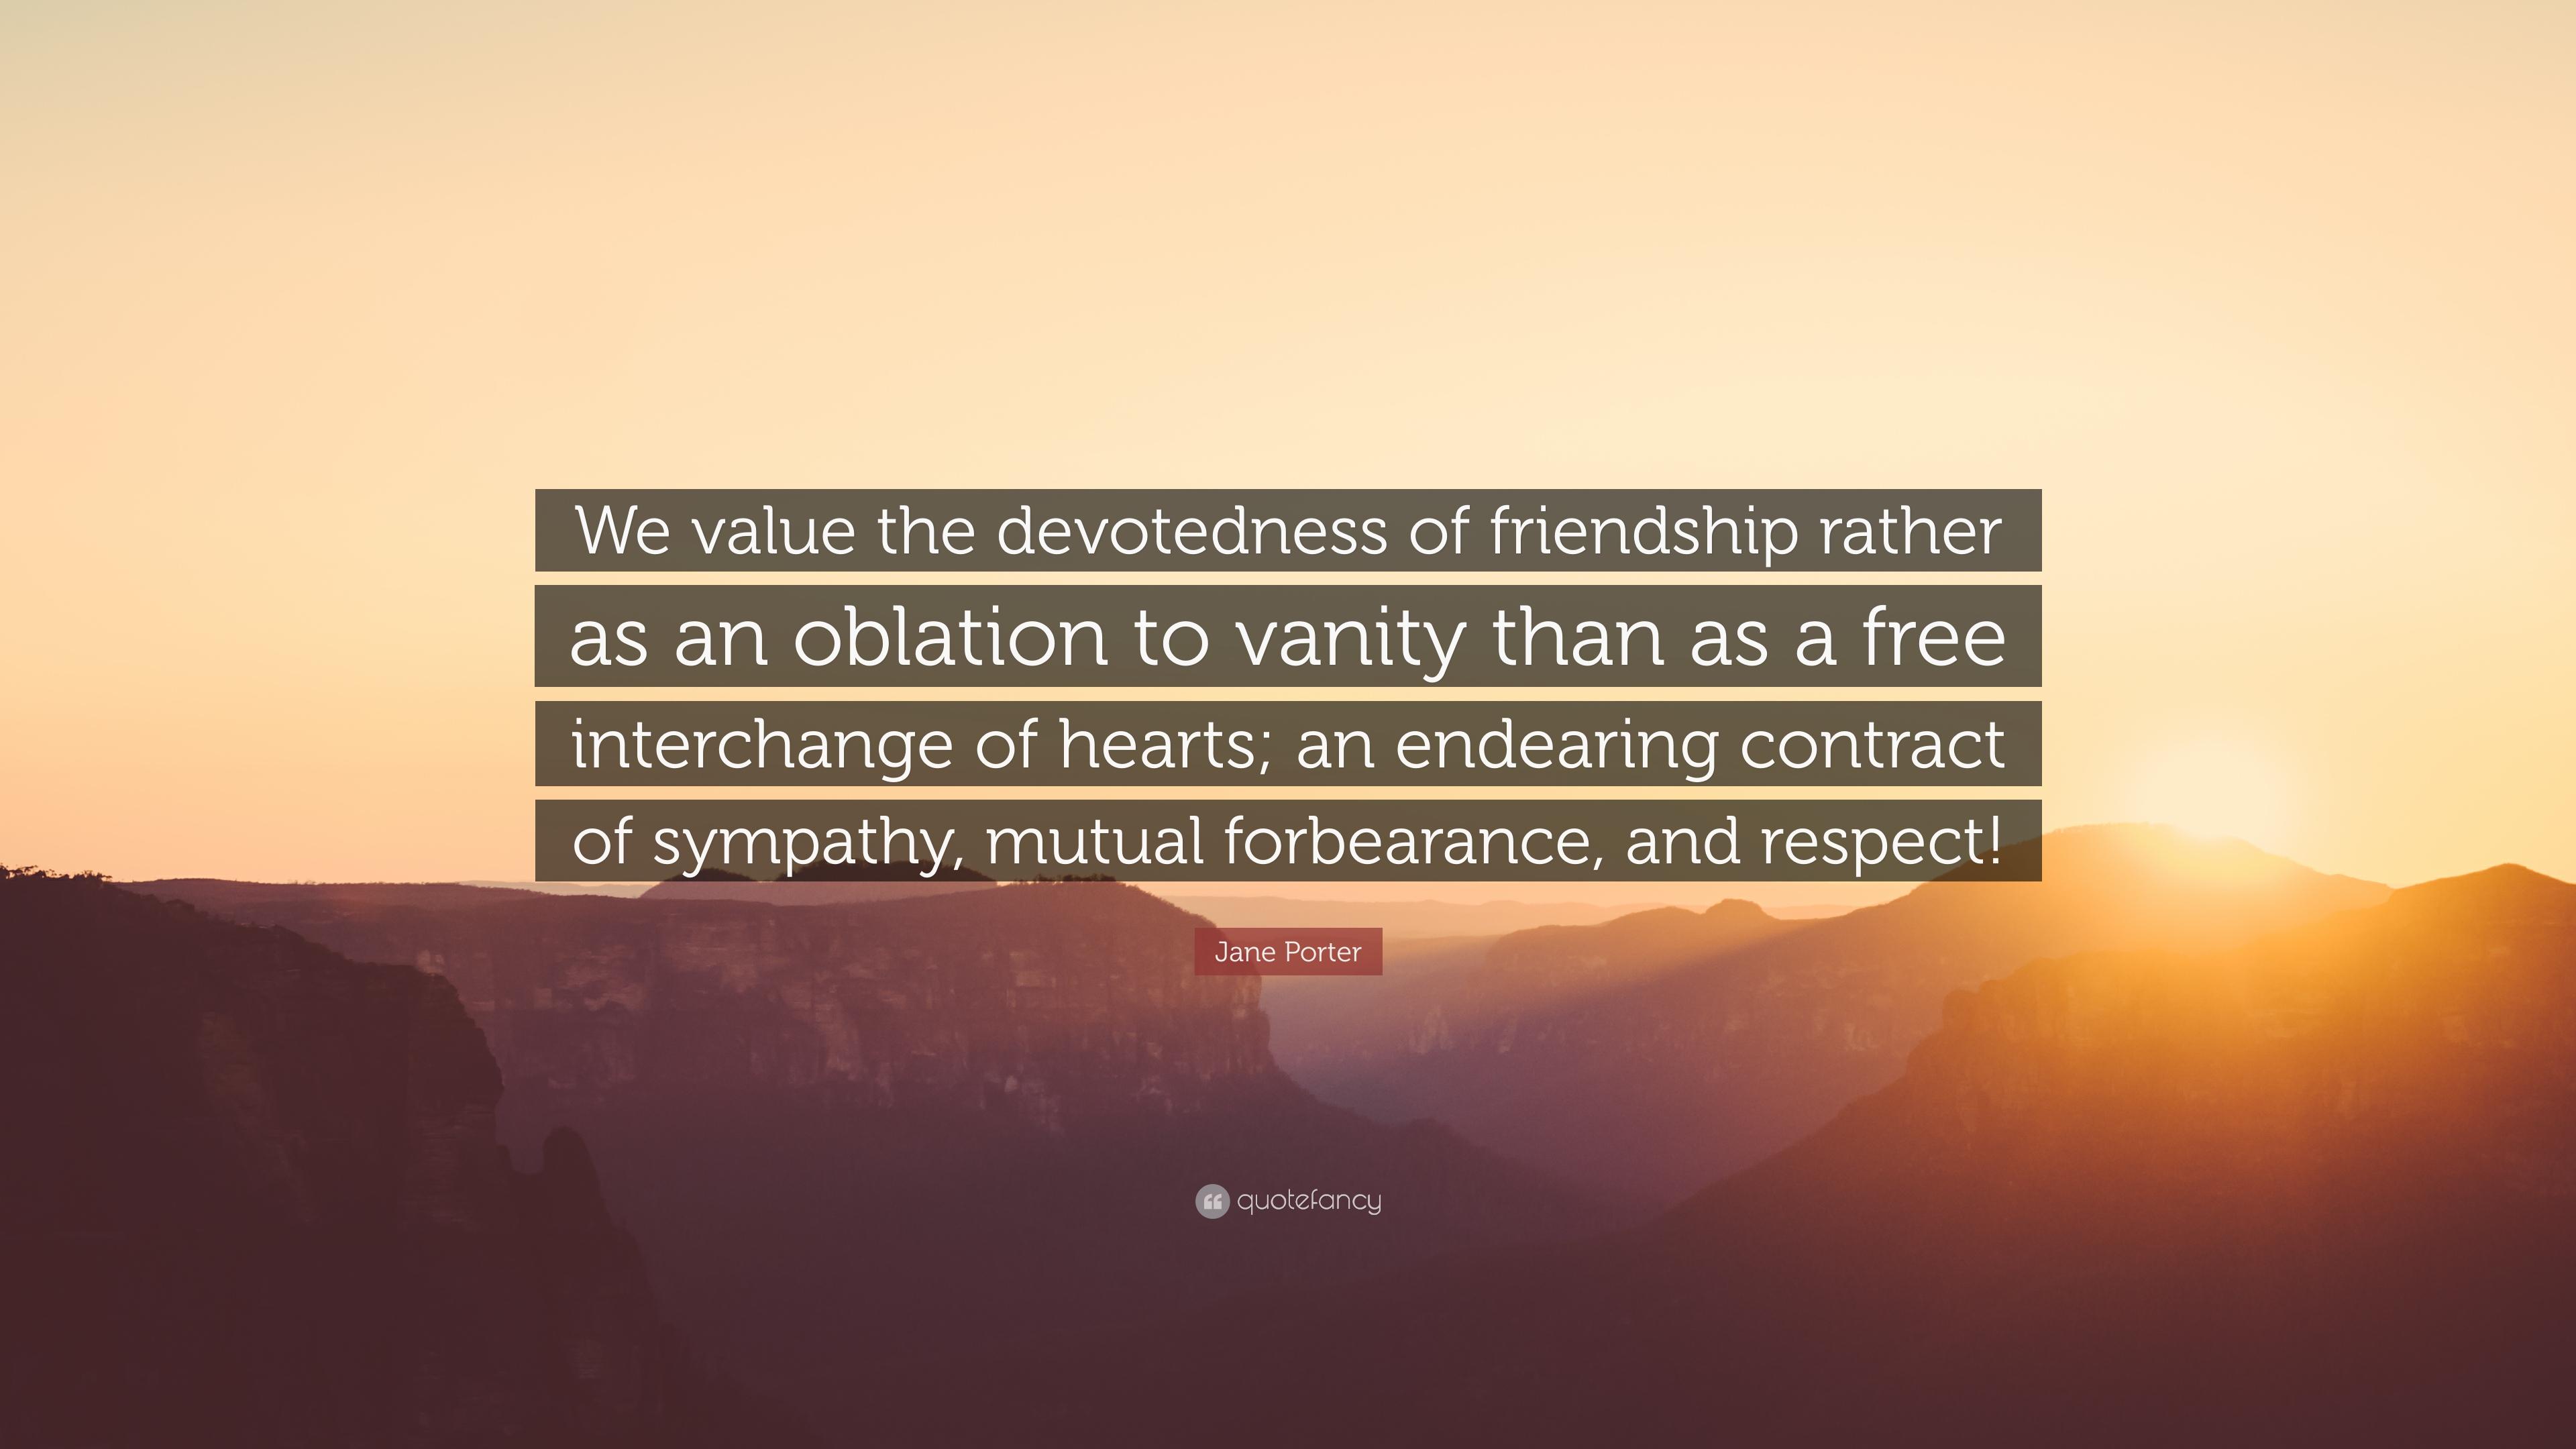 Jane Porter Quote: “We value the devotedness of friendship rather as